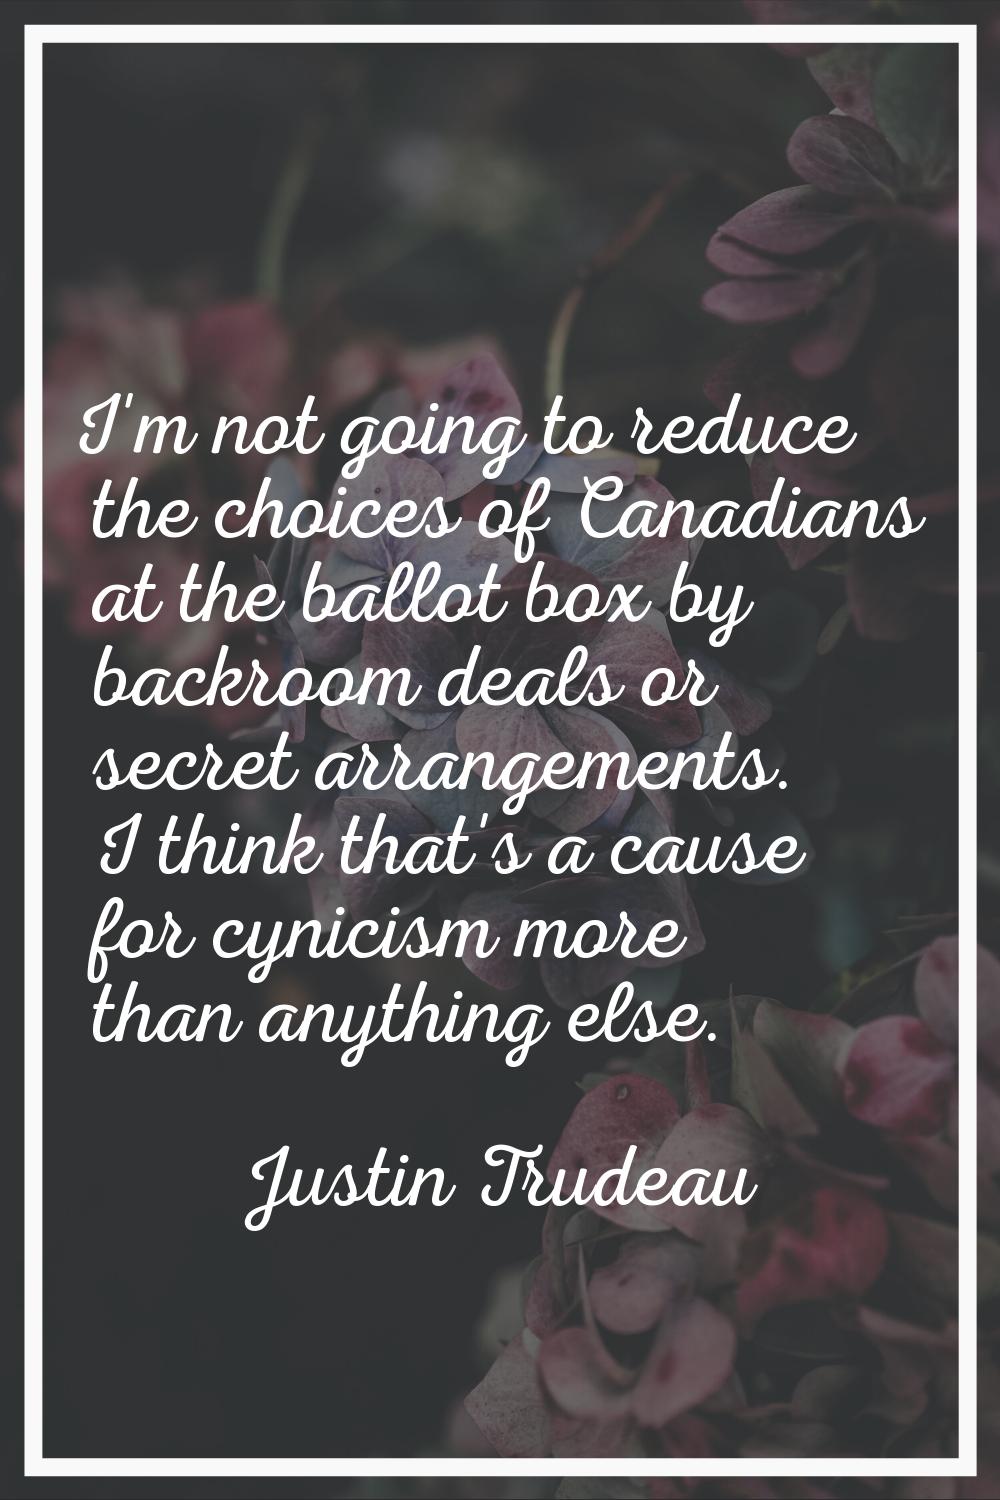 I'm not going to reduce the choices of Canadians at the ballot box by backroom deals or secret arra